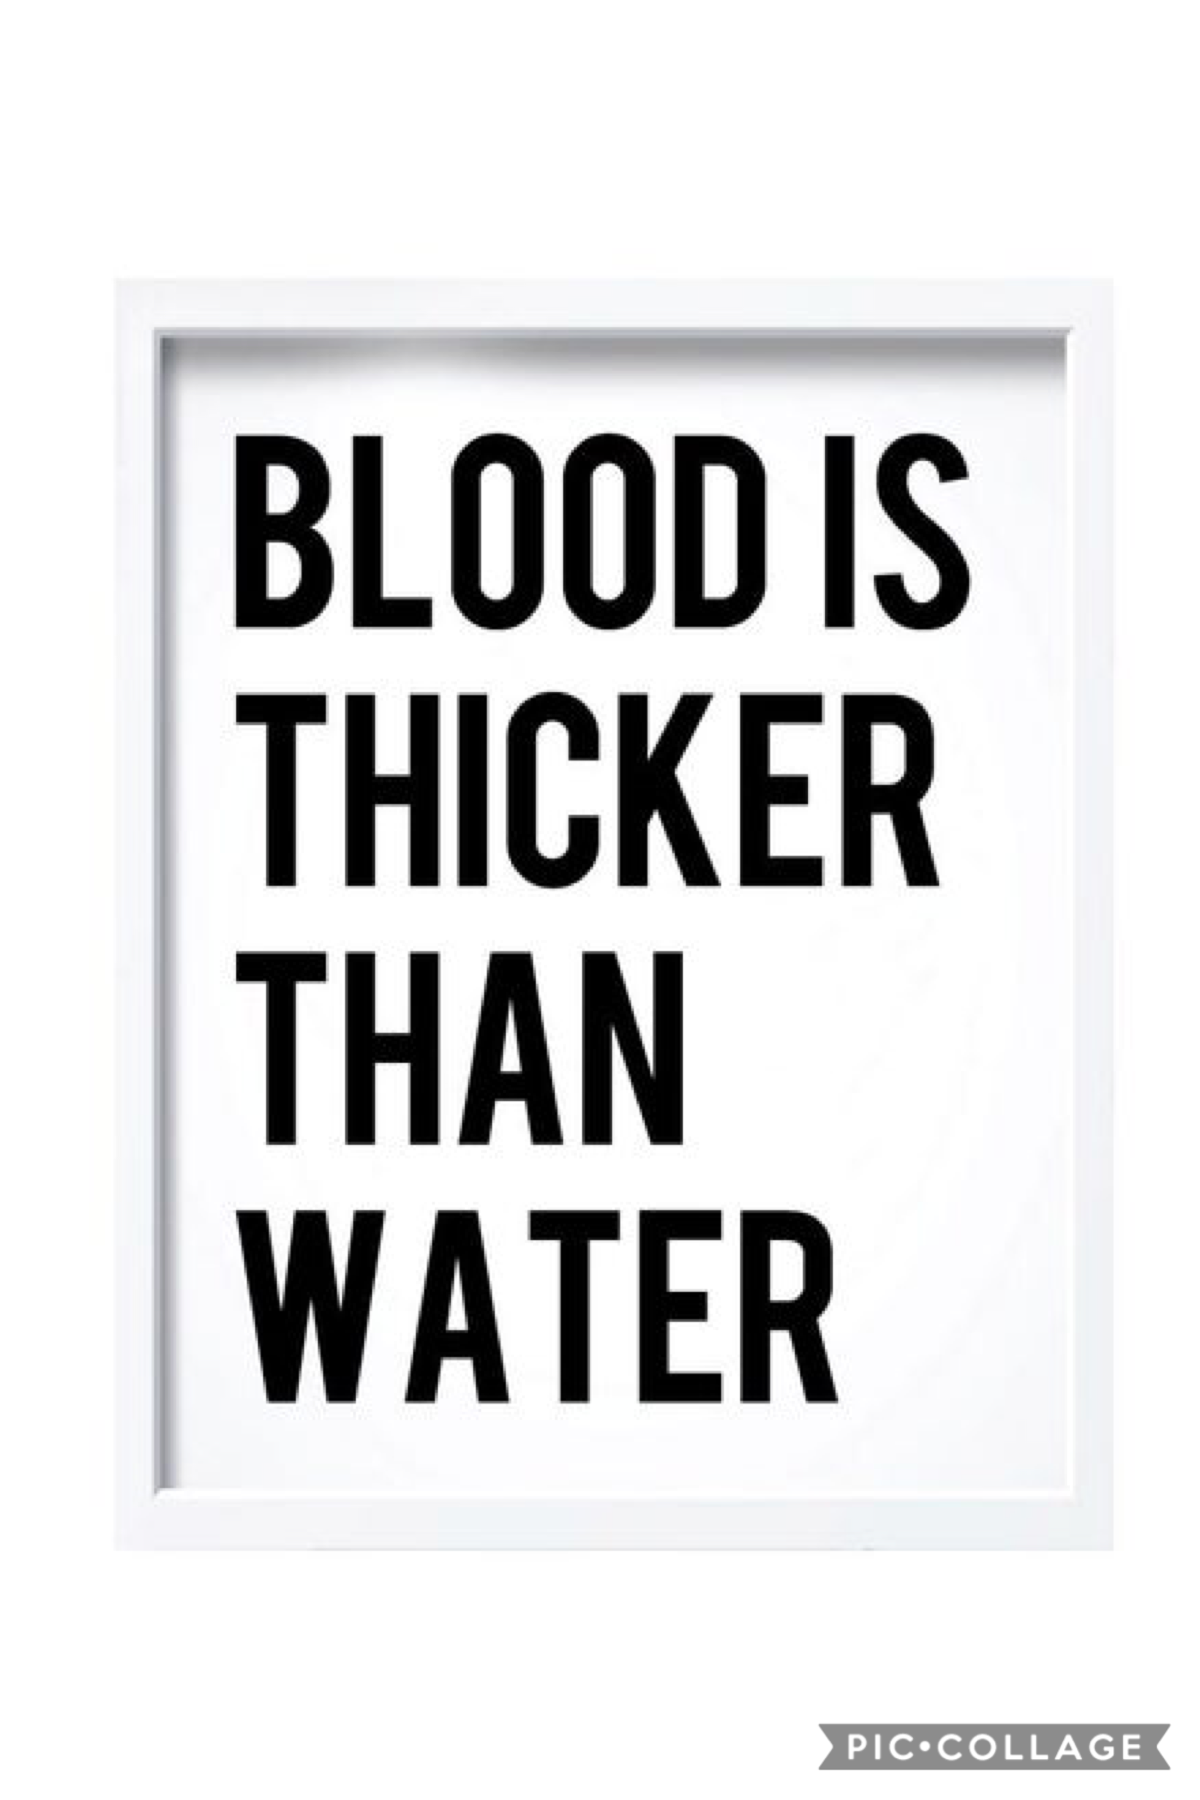 Blood is thicker than water. 